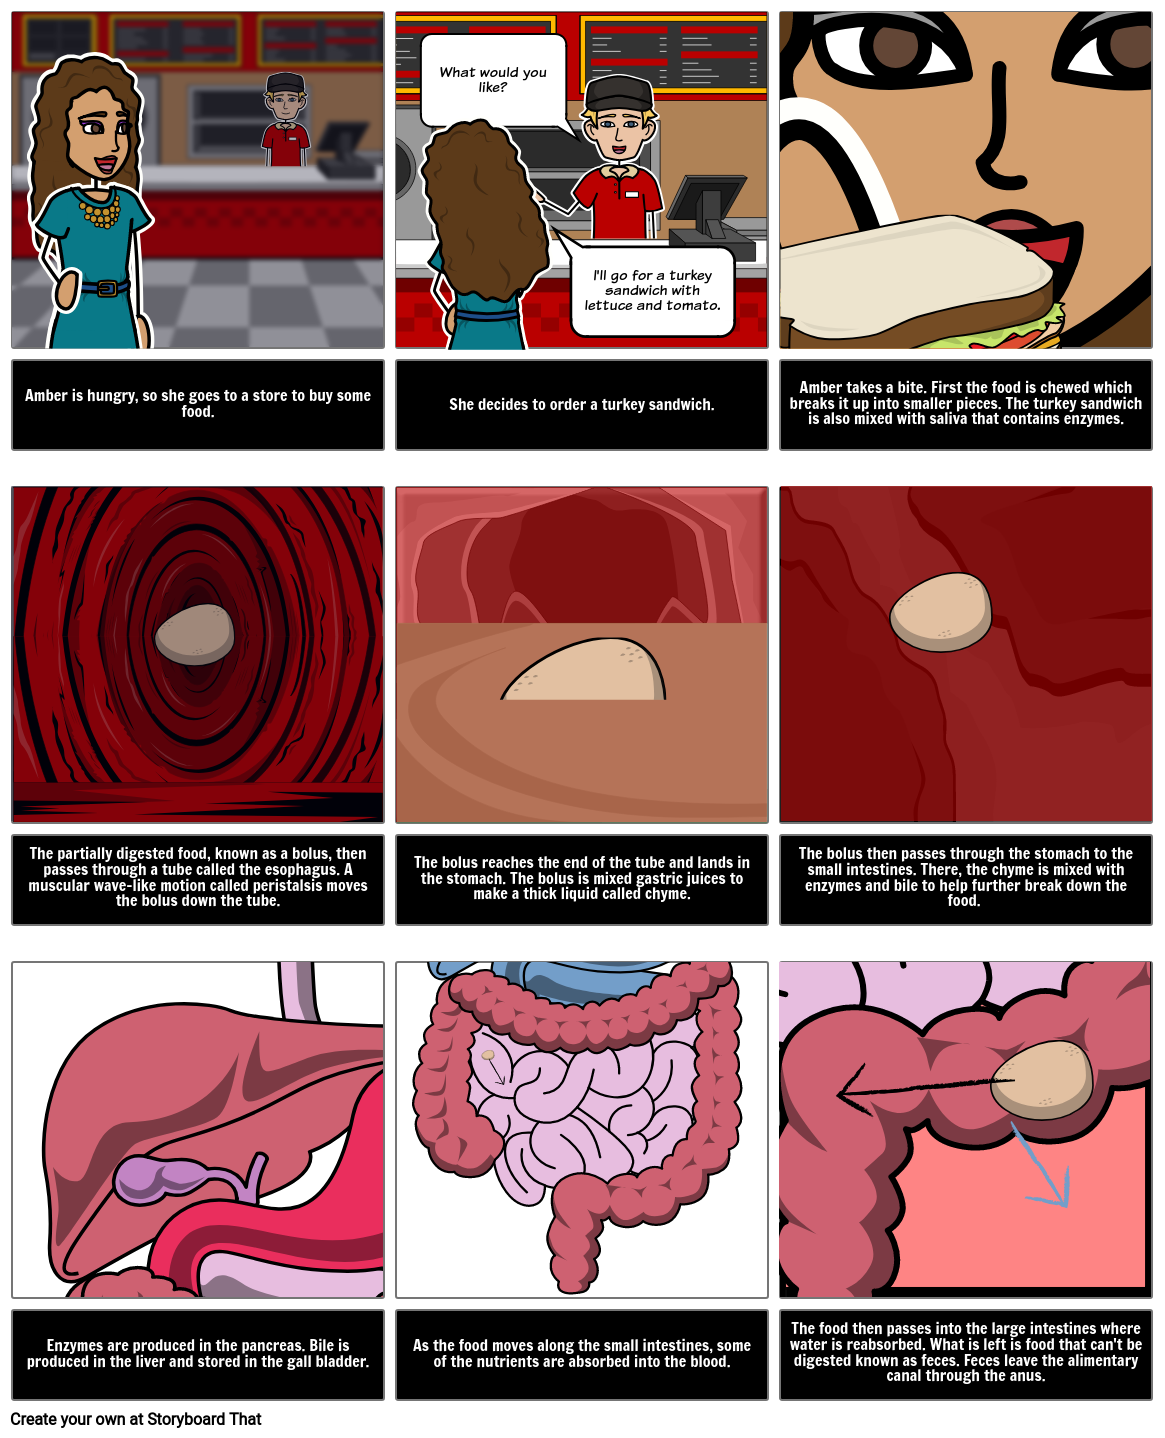 The Digestive System Diagram & Comic Science Activities